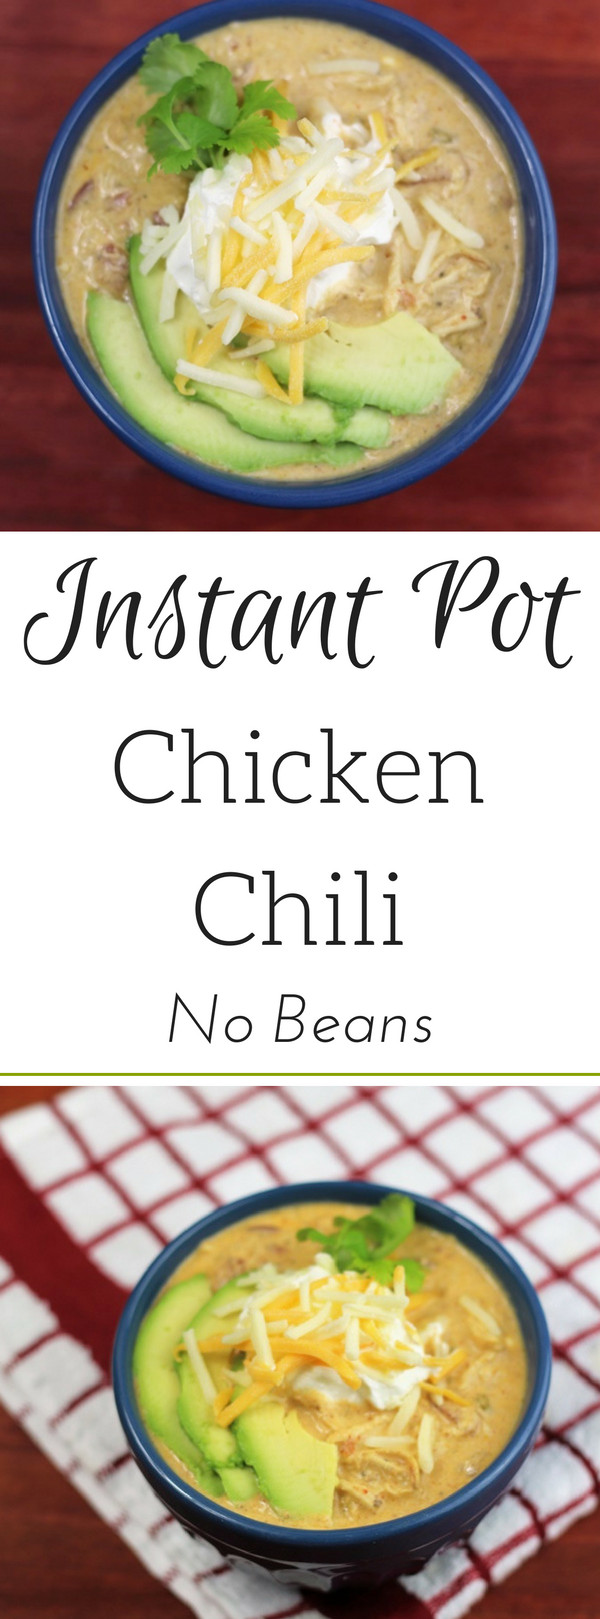 Instant Pot Keto Chicken Chili
 Easy Low Carb Instant Pot Chicken Chili No Beans